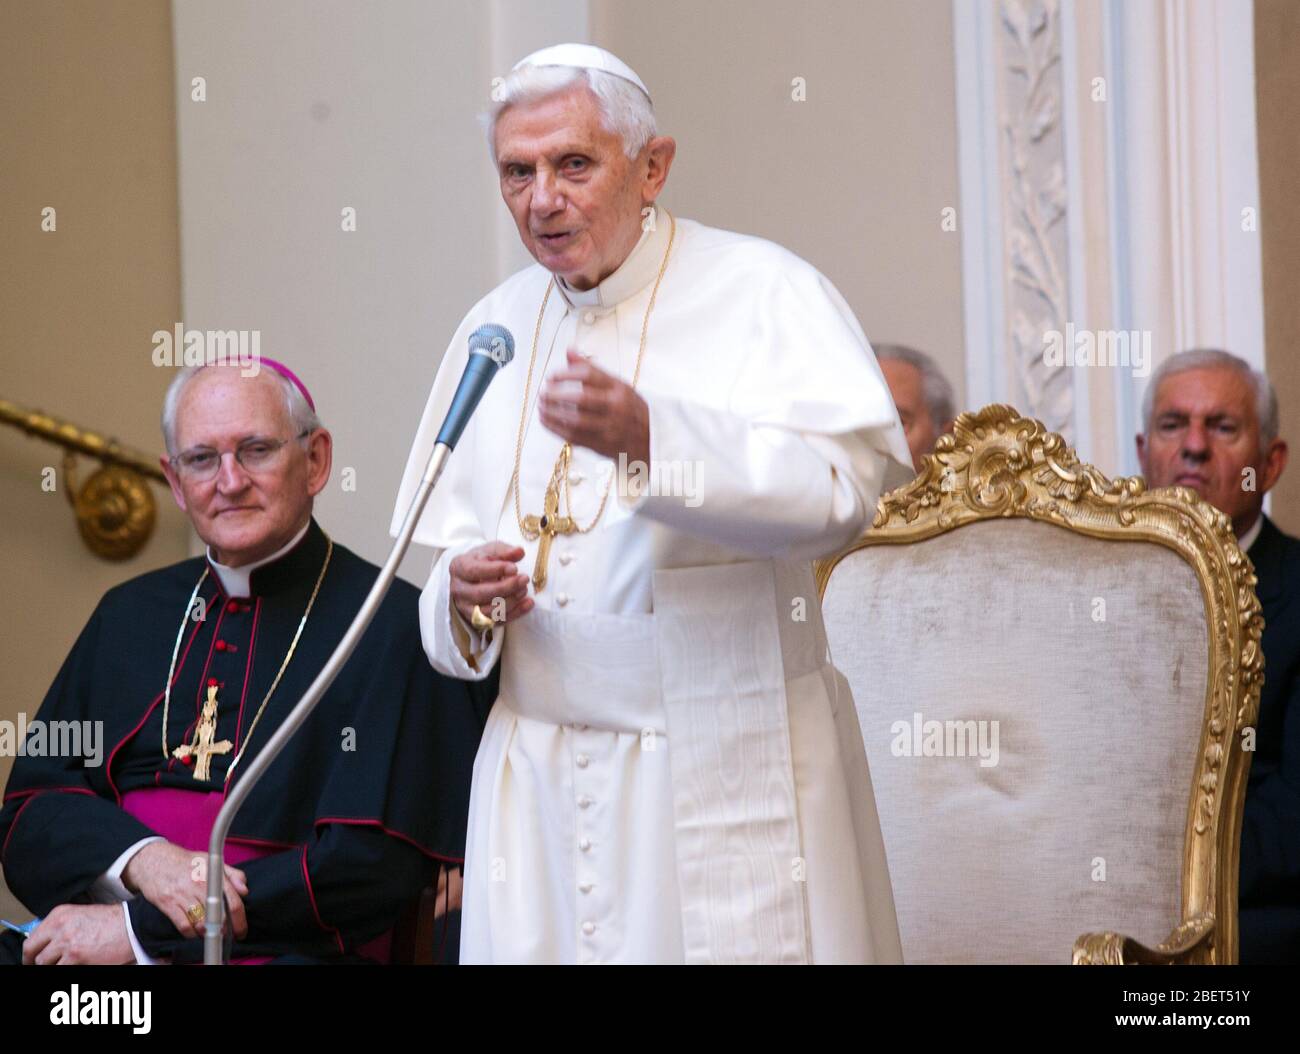 Honorary evening for Pope Benedict XVI. for his 85th Birthday in the  courtyard of the papal summer residence at Castel Gandolfo in Italy, with  costume Stock Photo - Alamy